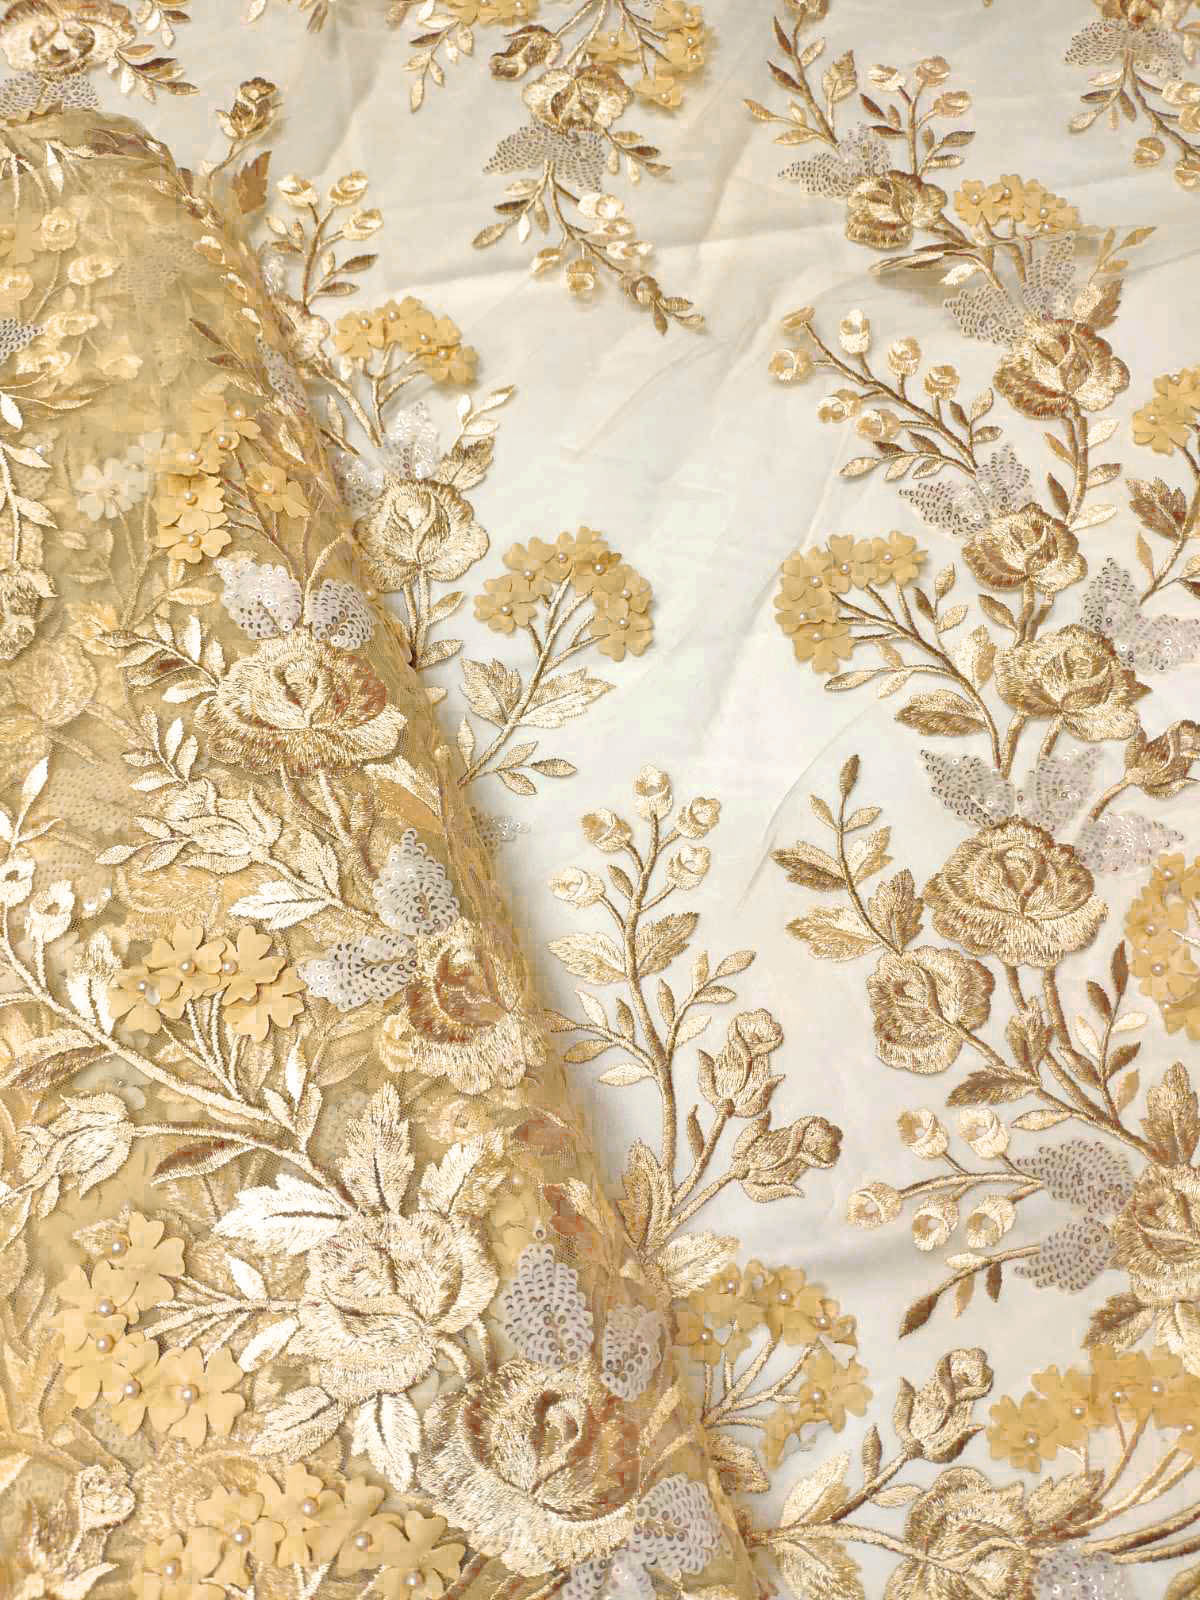 Gold lace fabric with 3d flowers #20641 - Design My Fabric